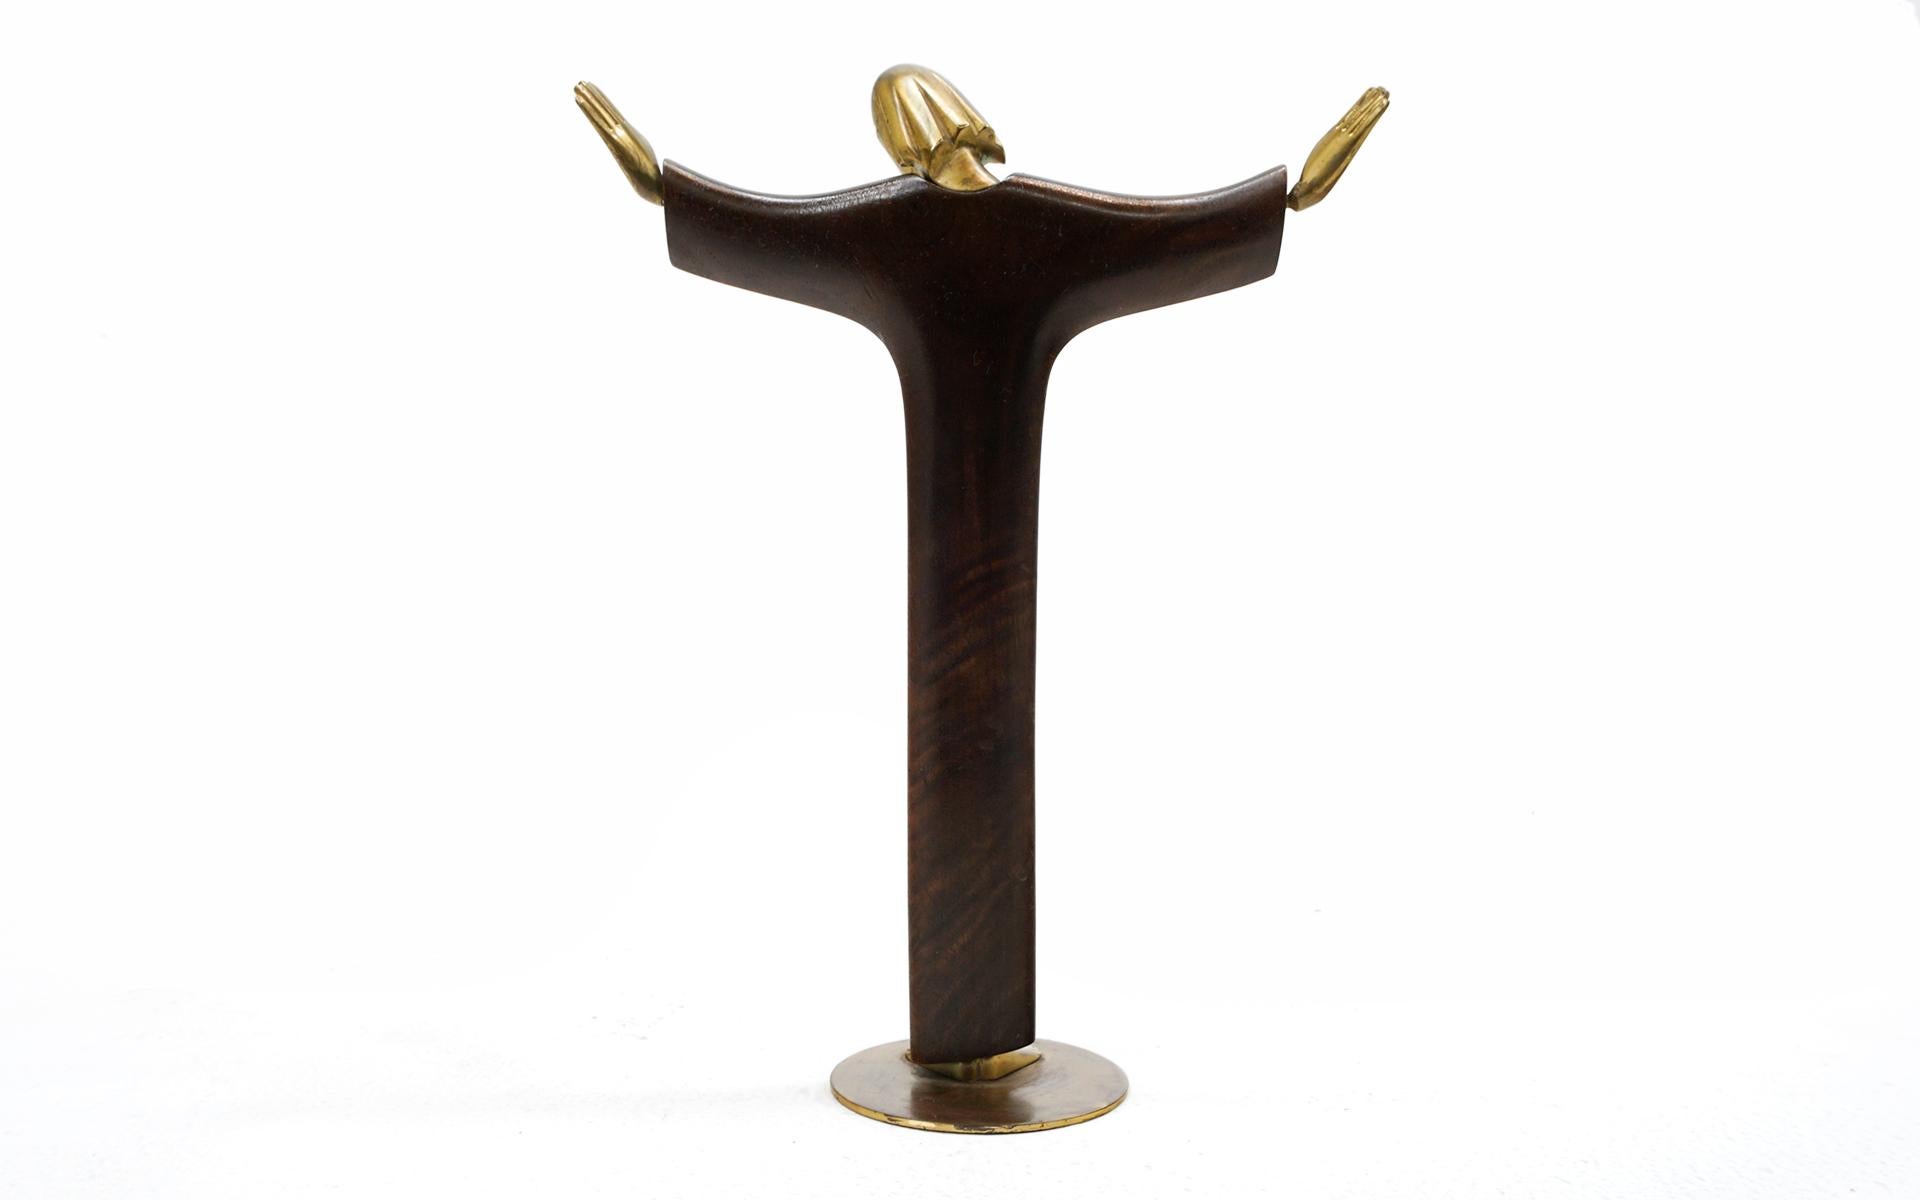 Untitled 'Christ' Sculpture by Karl Hagenauer, 1950, Rosewood and Bronze In Good Condition For Sale In Kansas City, MO